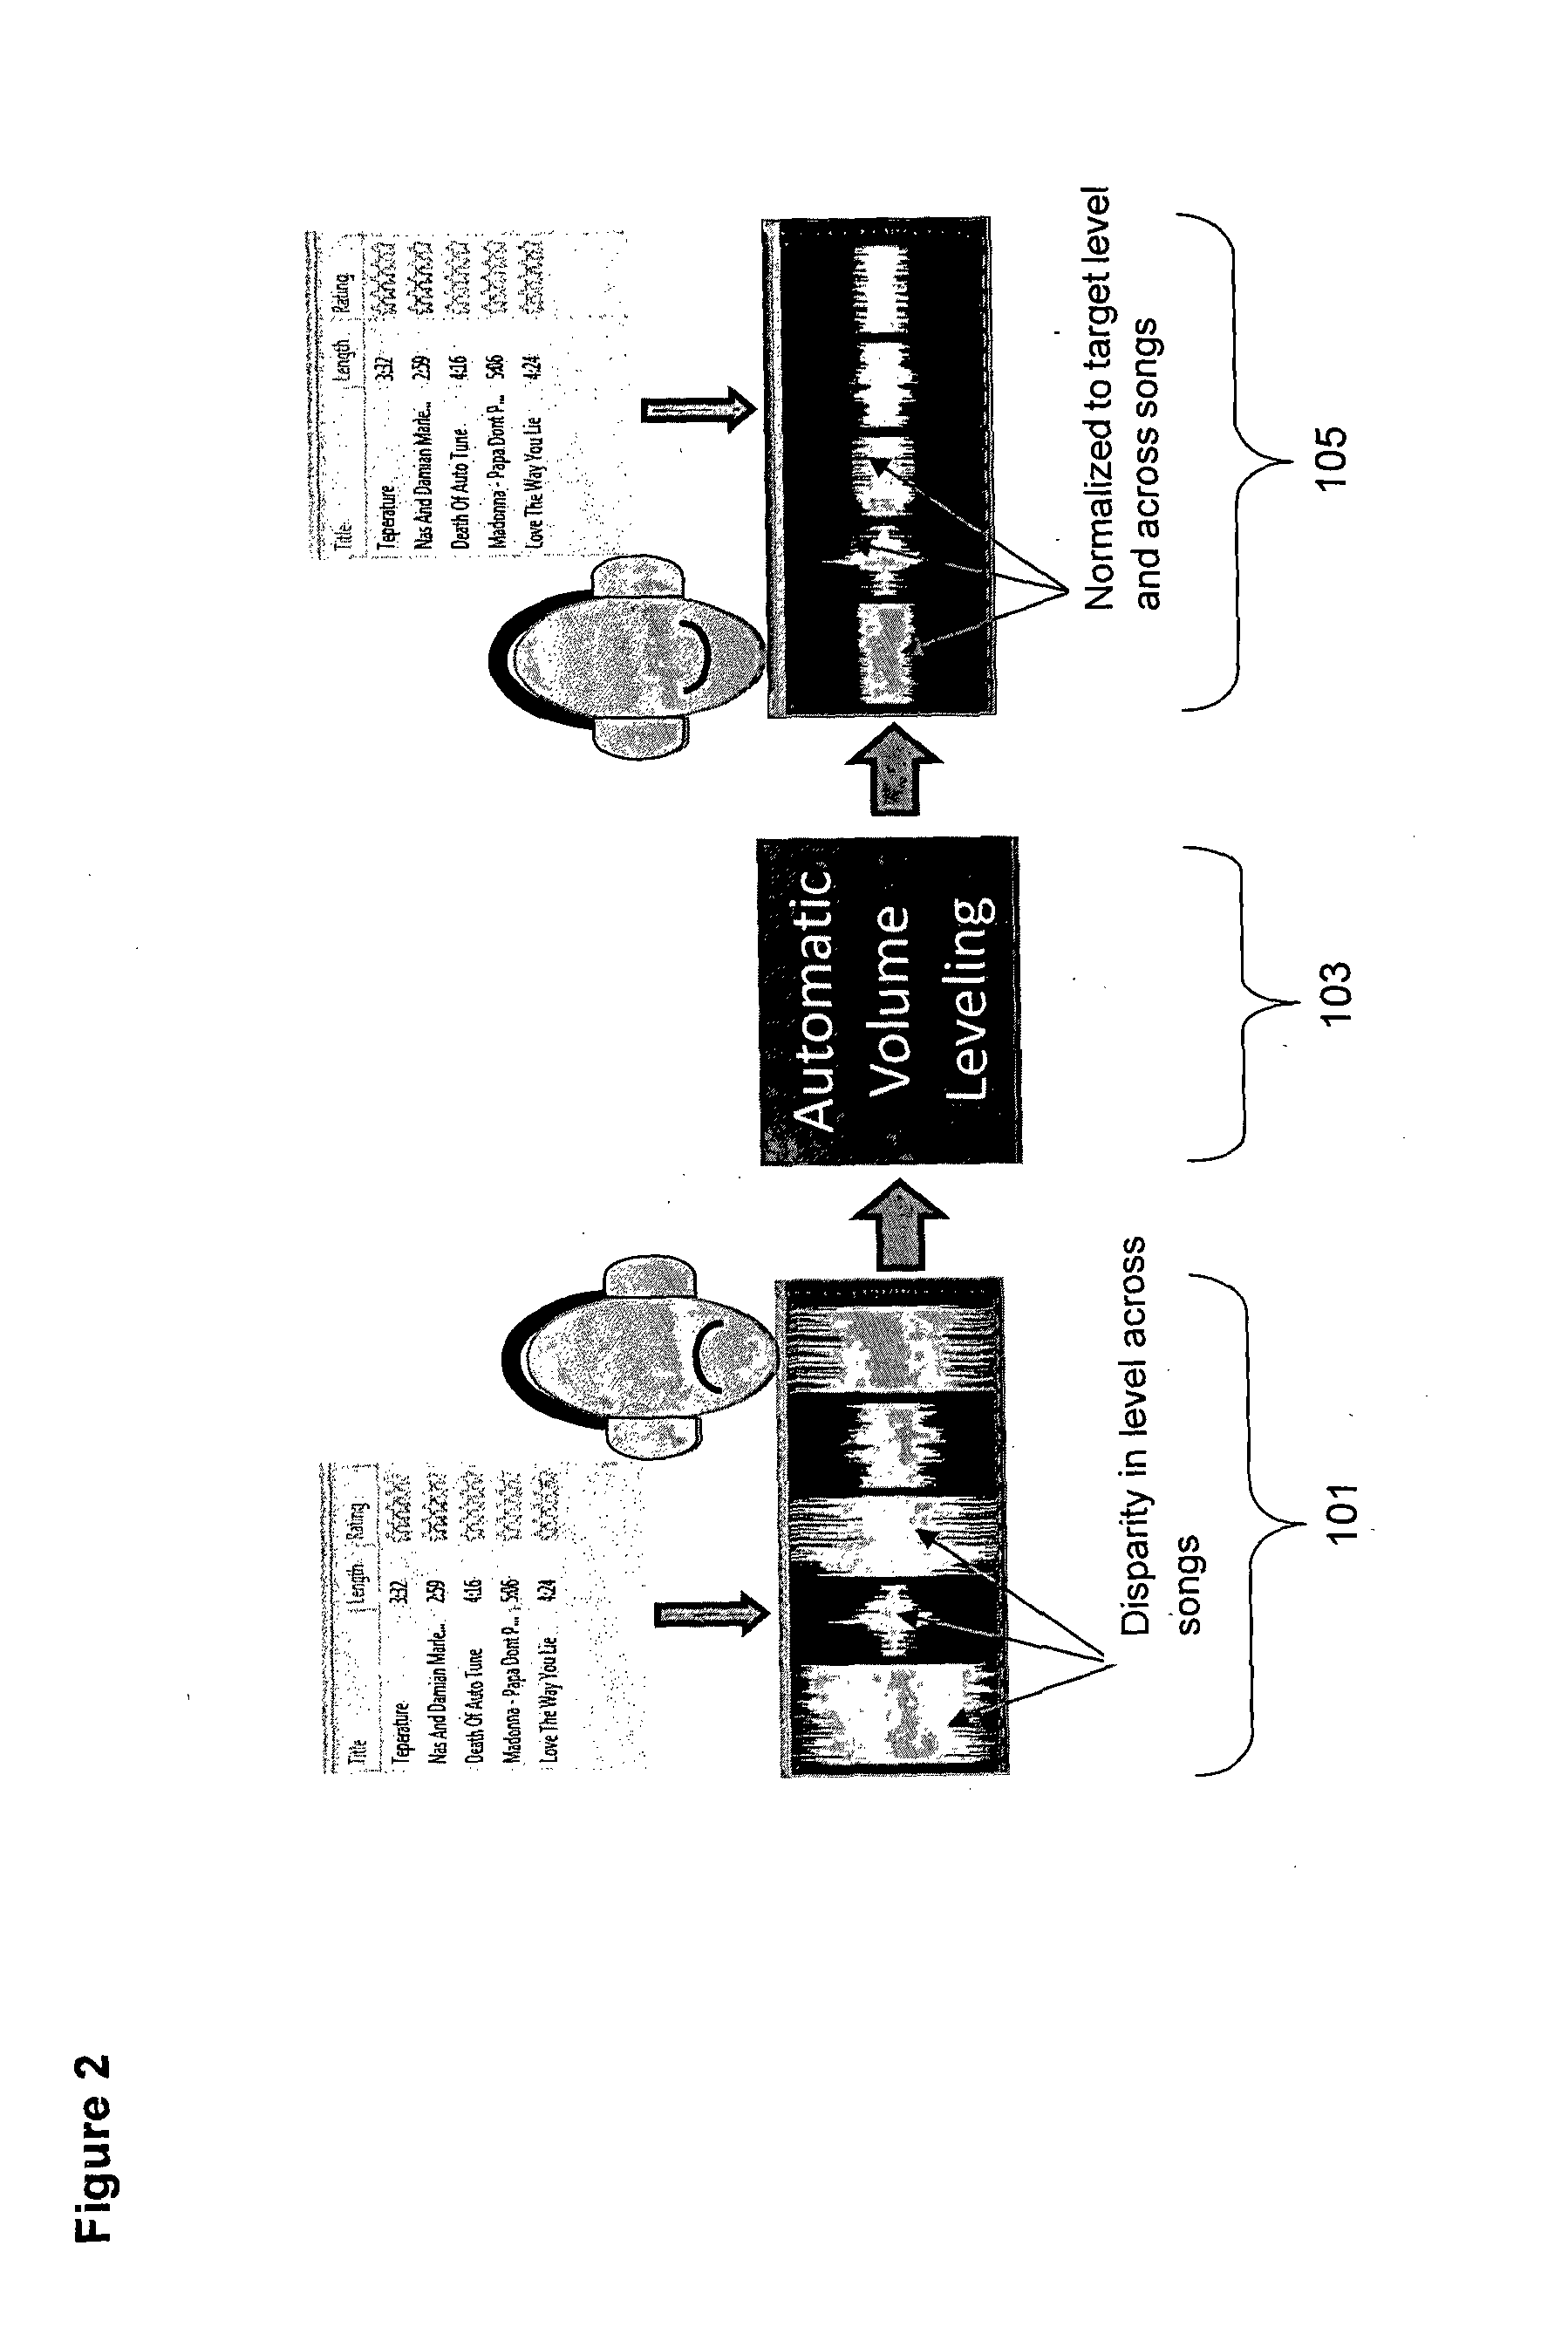 Method and an apparatus for automatic volume leveling of audio signals